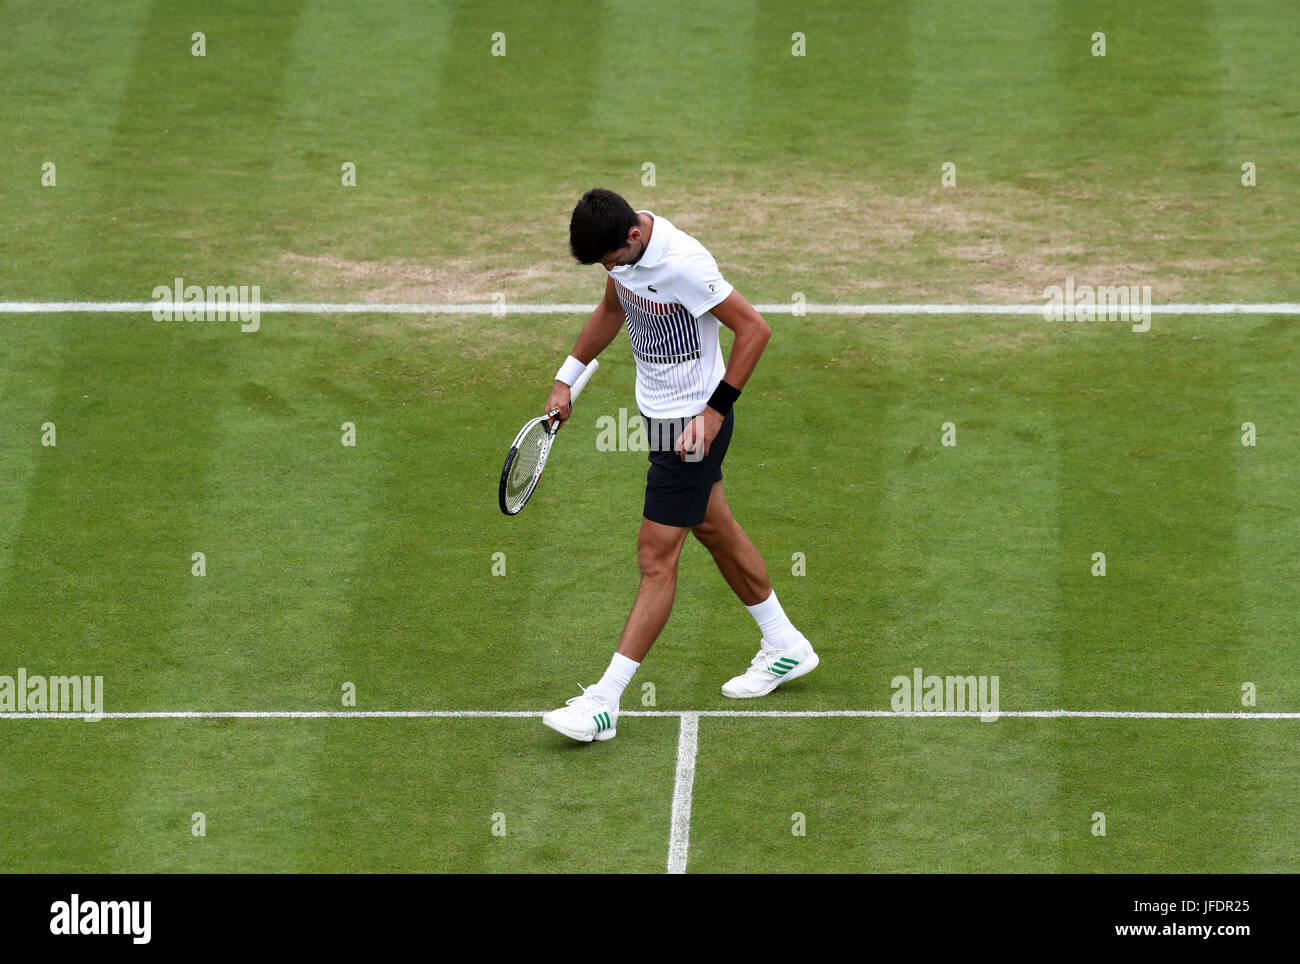 Serbia's Novak Djokovic appears dejected during his match against Russia's Daniil Medvedev during day eight of the AEGON International at Devonshire Park, Eastbourne. PRESS ASSOCIATION Photo. Picture date: Friday June 30, 2017. See PA story TENNIS Eastbourne. Photo credit should read: Gareth Fuller/PA Wire. . Stock Photo